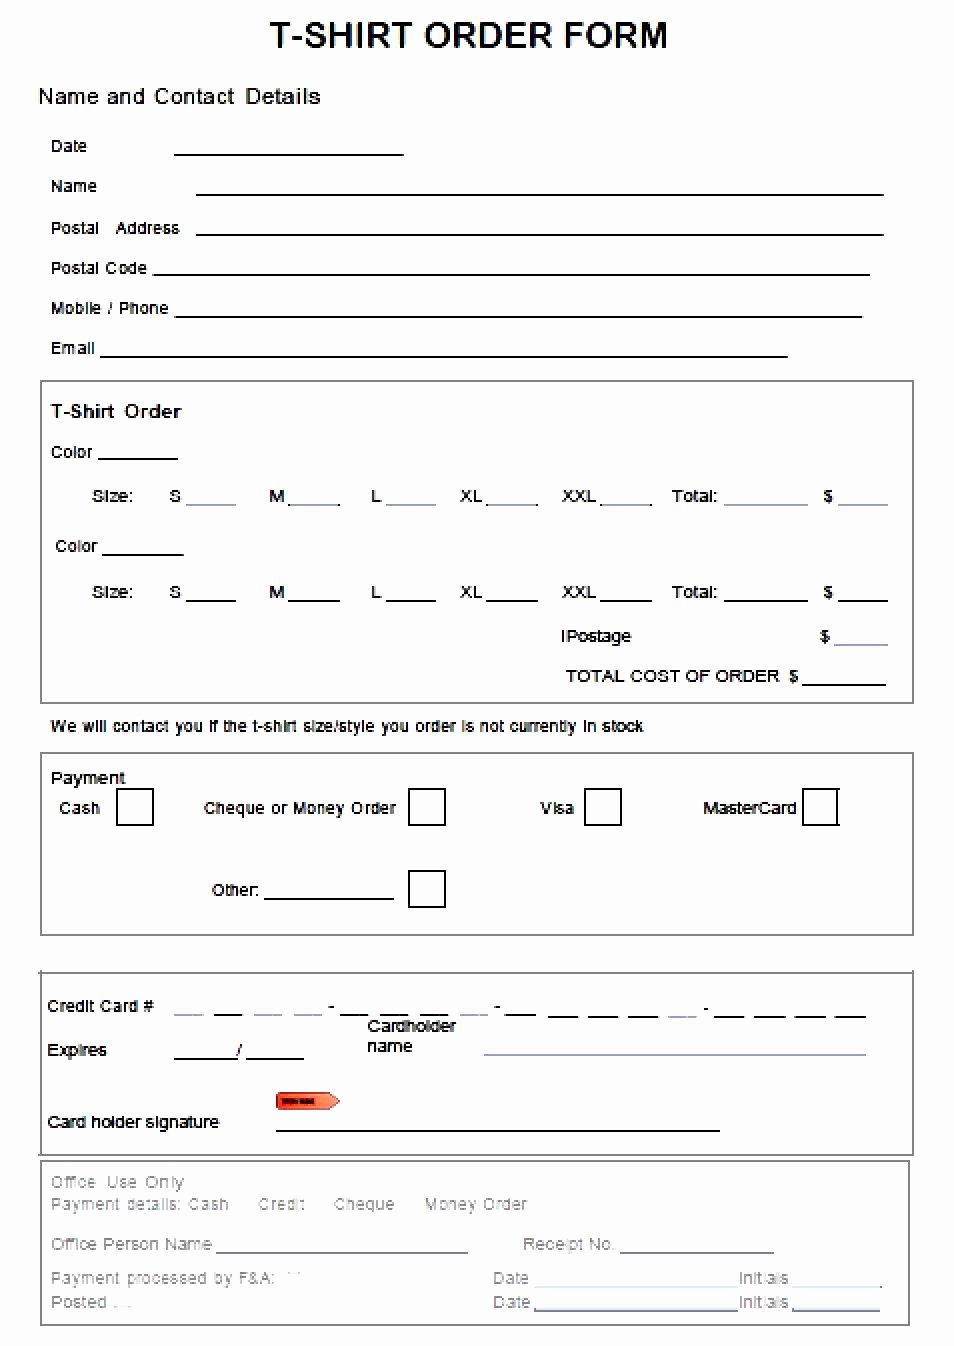 Shirt order forms Template Unique T Shirt order form Template